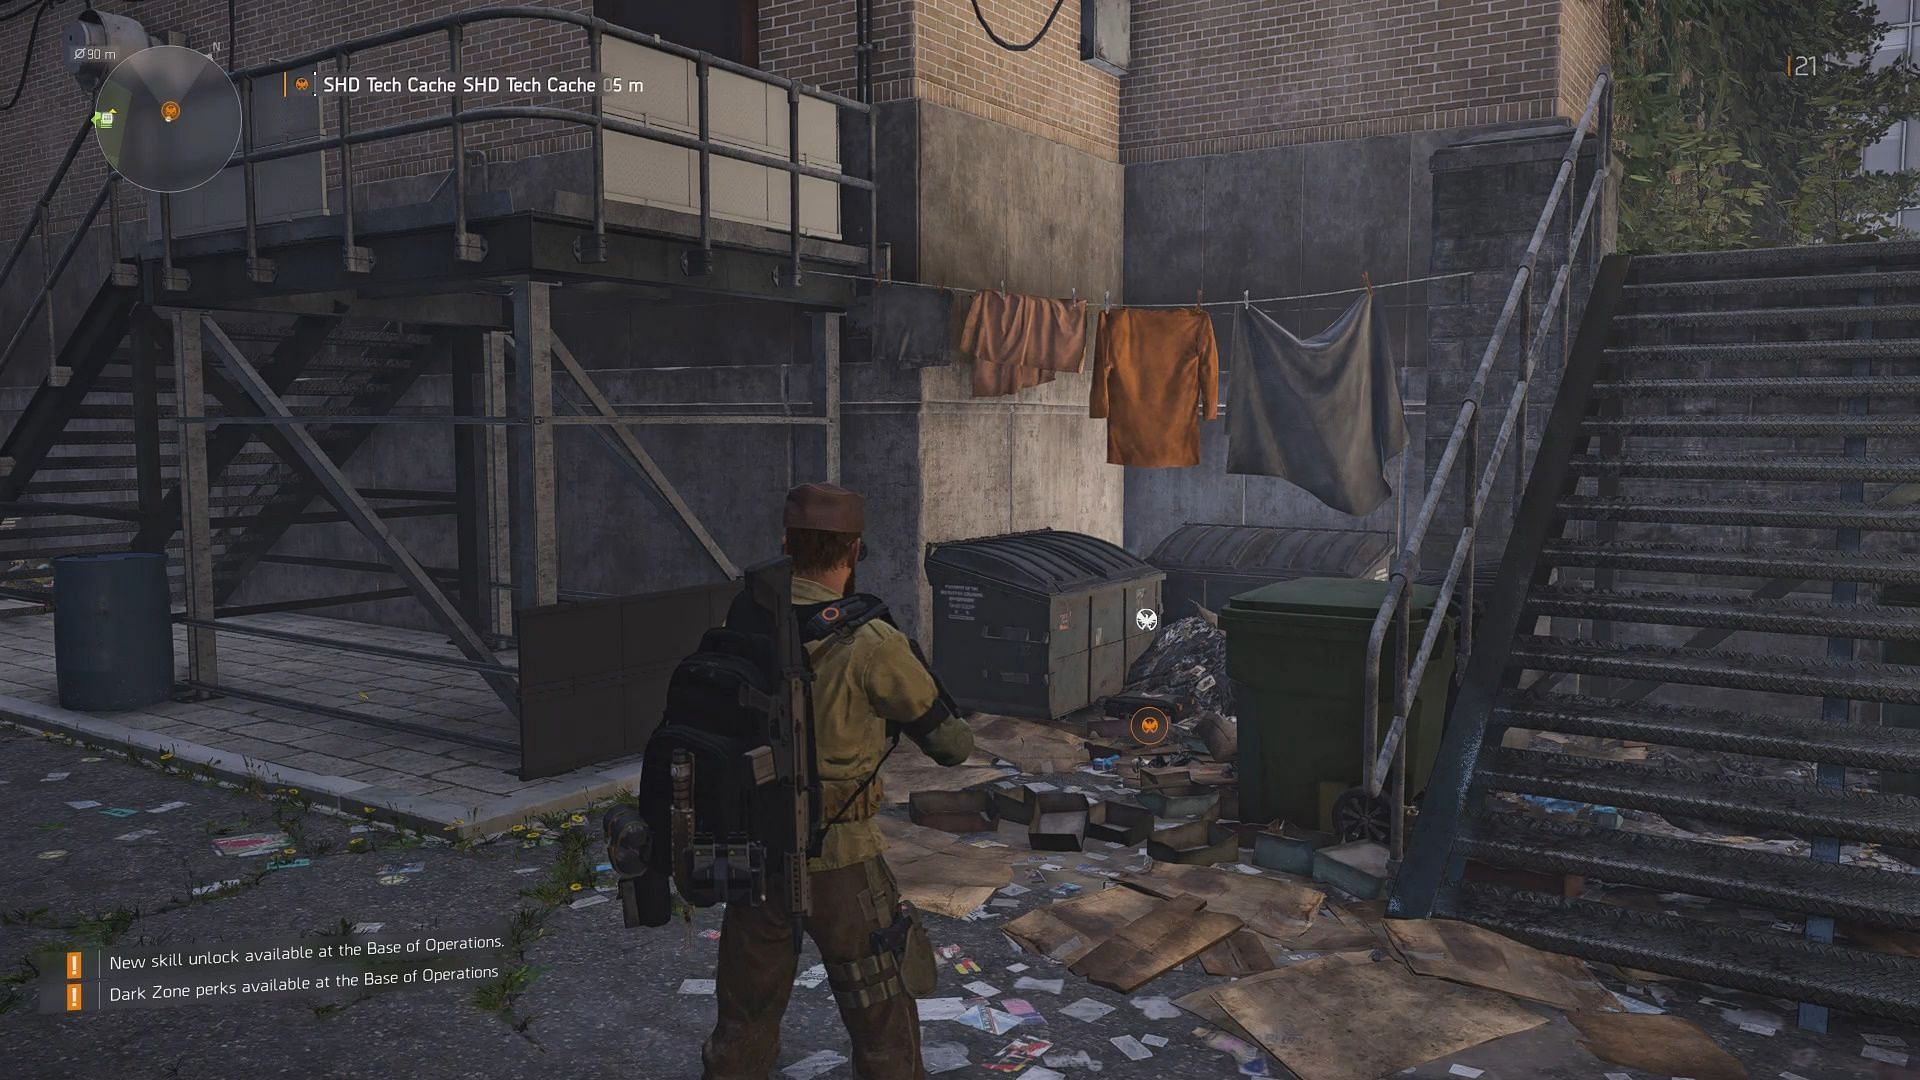 The first SHD cache in The Division 2 (Image via Ubisoft)